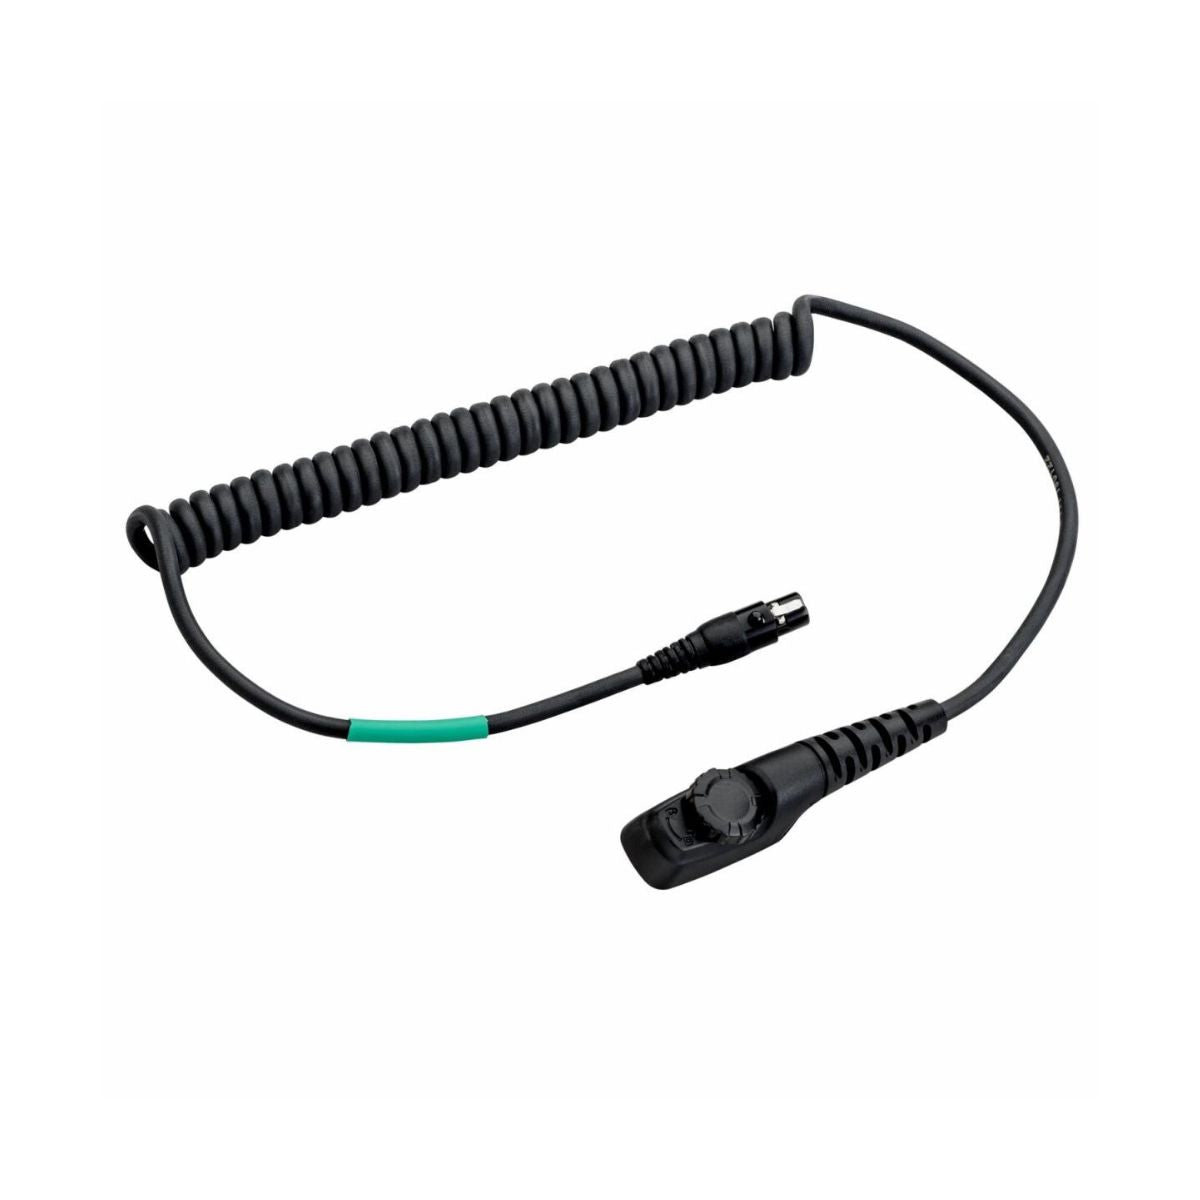 3M™ PELTOR™ FLX2 Cable, Hytera PD7 Series FLX2-111